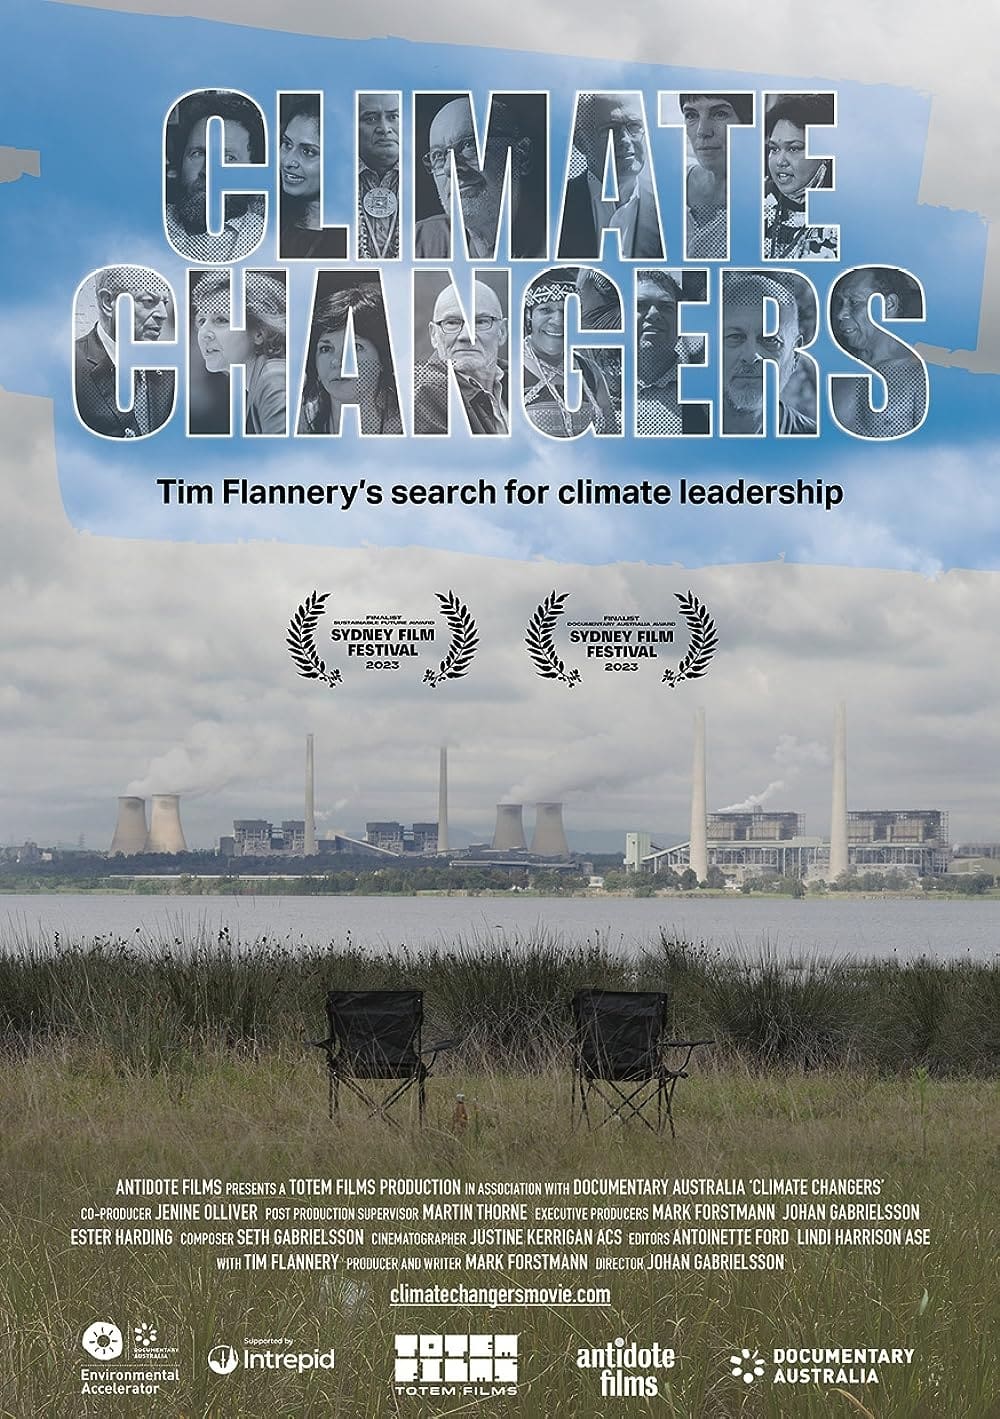 Climate Changers